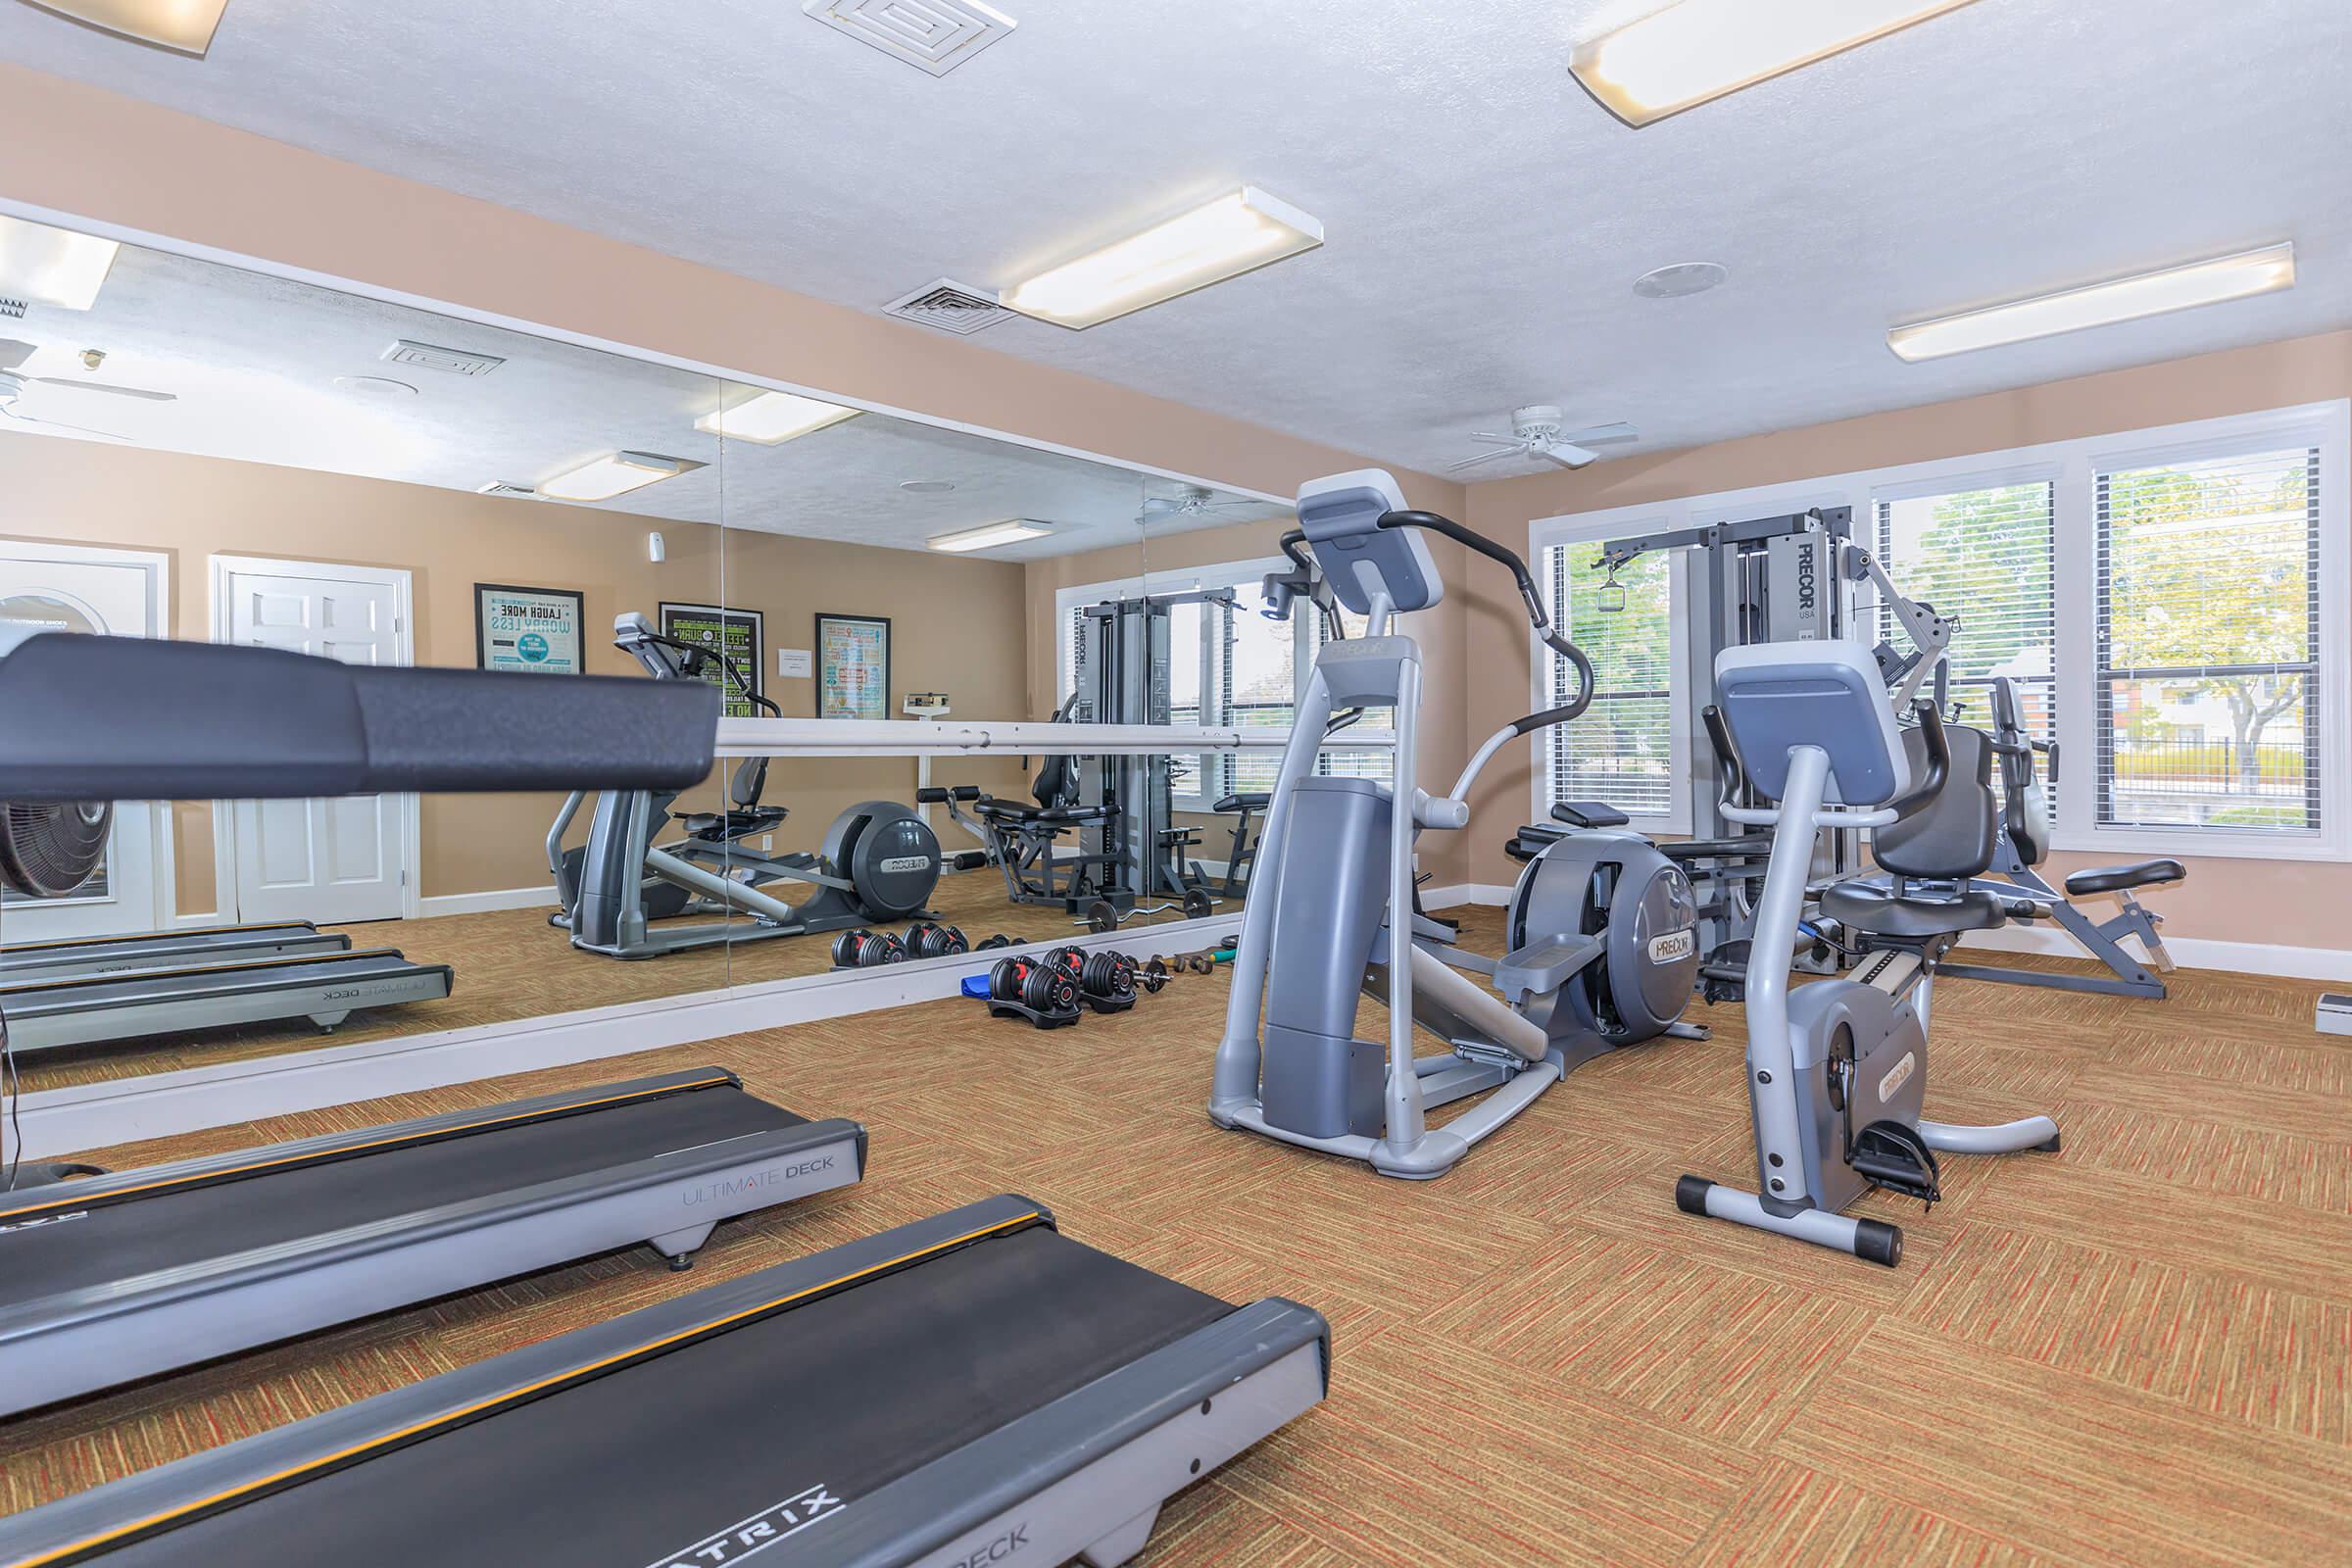 STAYING FIT IS MADE EASY AT SUMMER RIDGE APARTMENTS